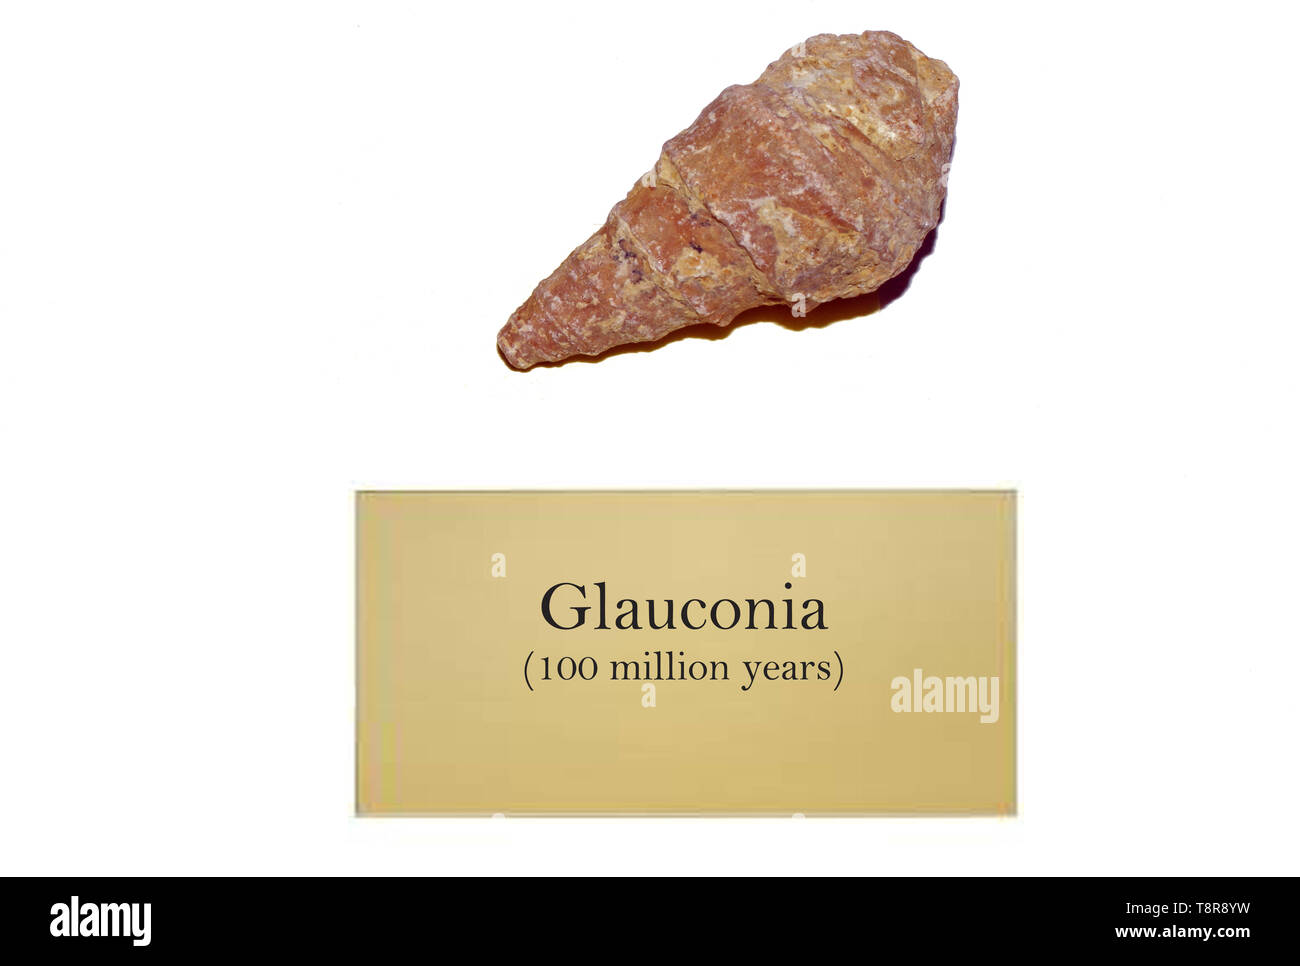 Glauconia shell fossil close-up Stock Photo